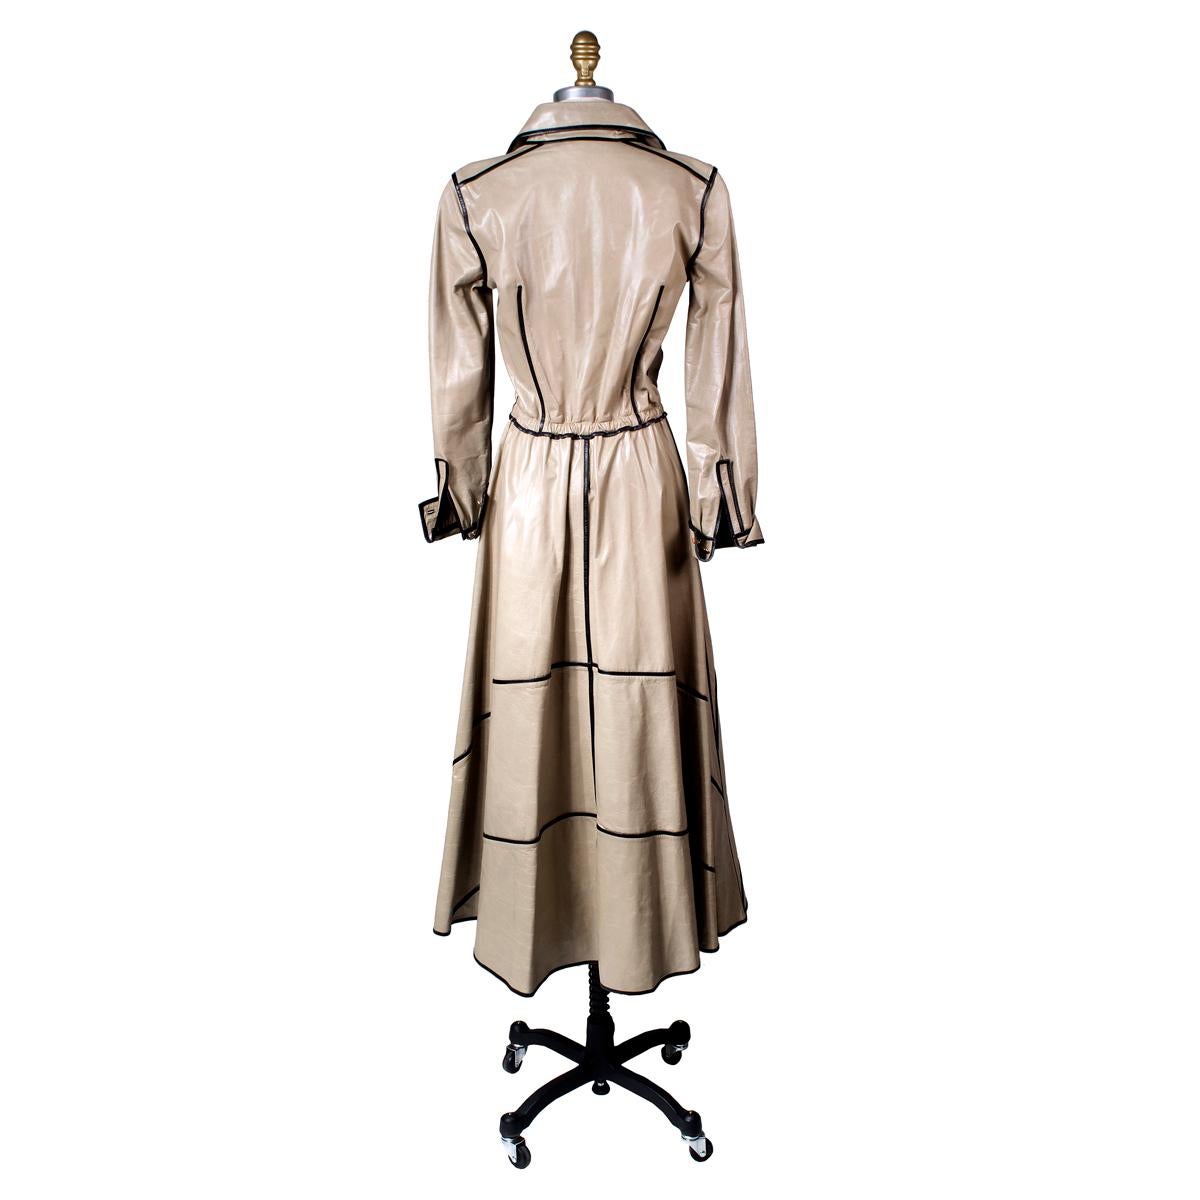 Vintage dress by Fendi circa 1970s
Taupe leather with black leather piping
Trenchcoat style dress with button closures from wait to neckline
Condition: Excellent, minor wear to leather
Size/Measurements:
Italian size 40
15.5